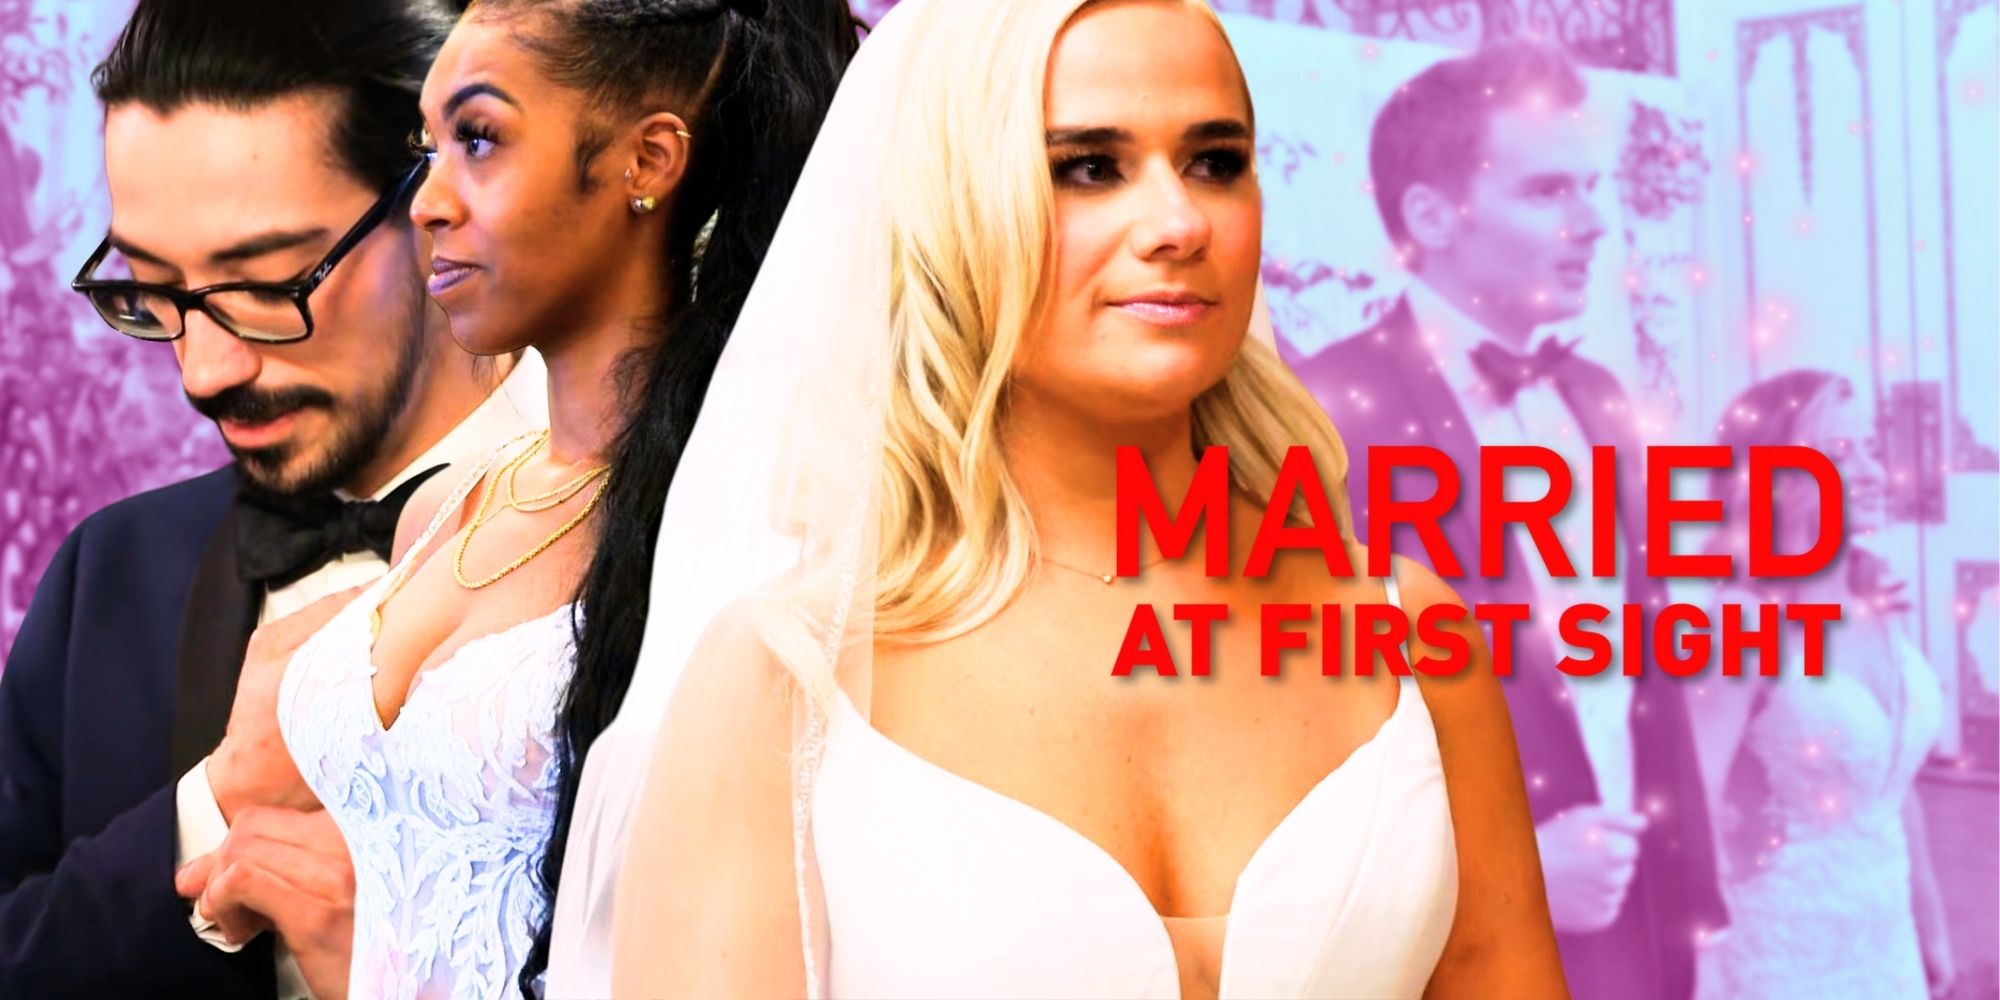 Married at First Sight season 17 cast montage in wedding outfits